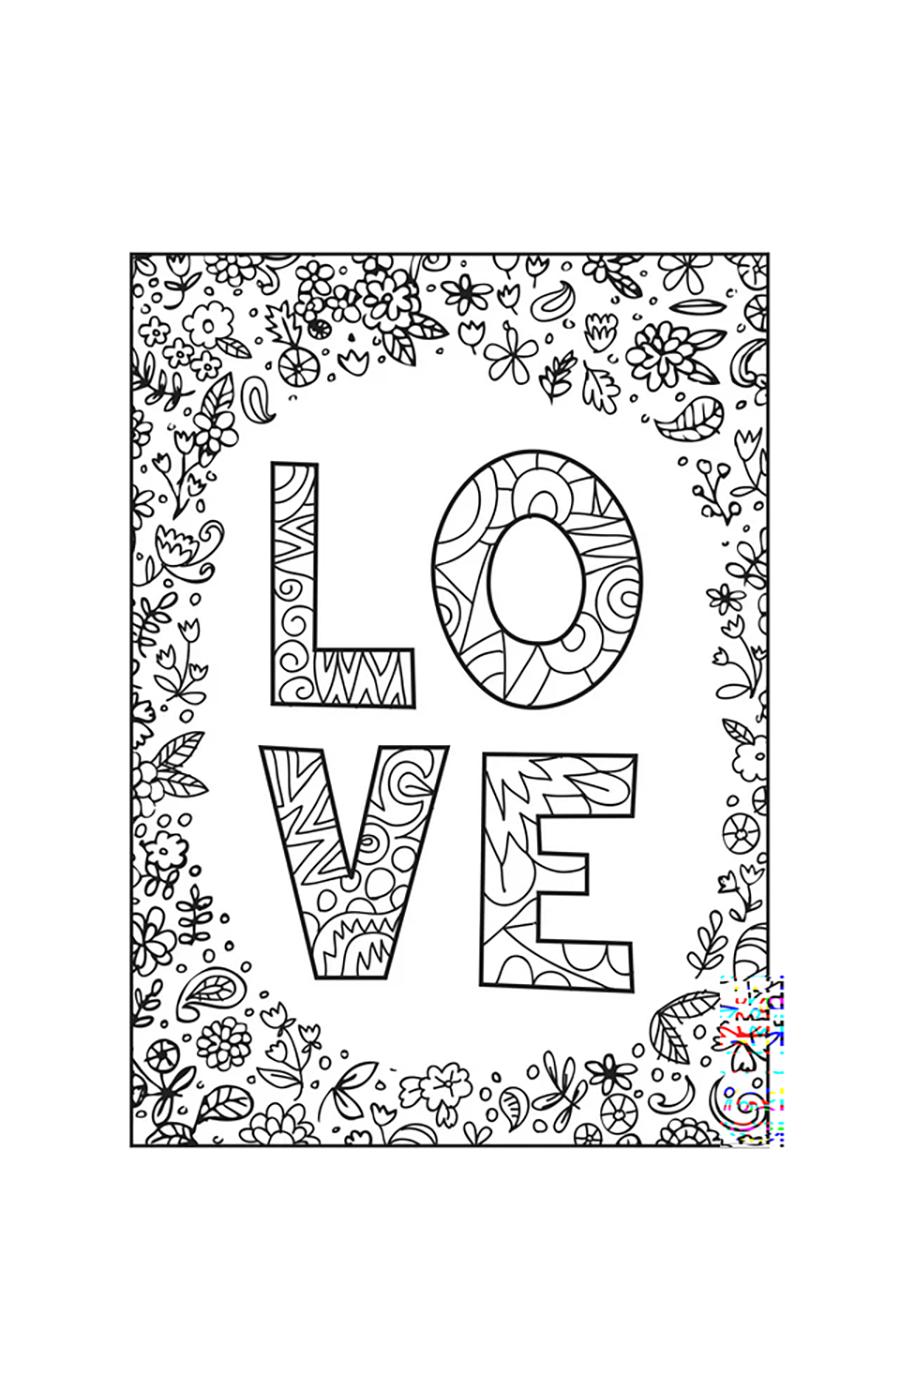 Cra-Z-Art Timeless Creations Words of Wonder Coloring Book; image 2 of 5